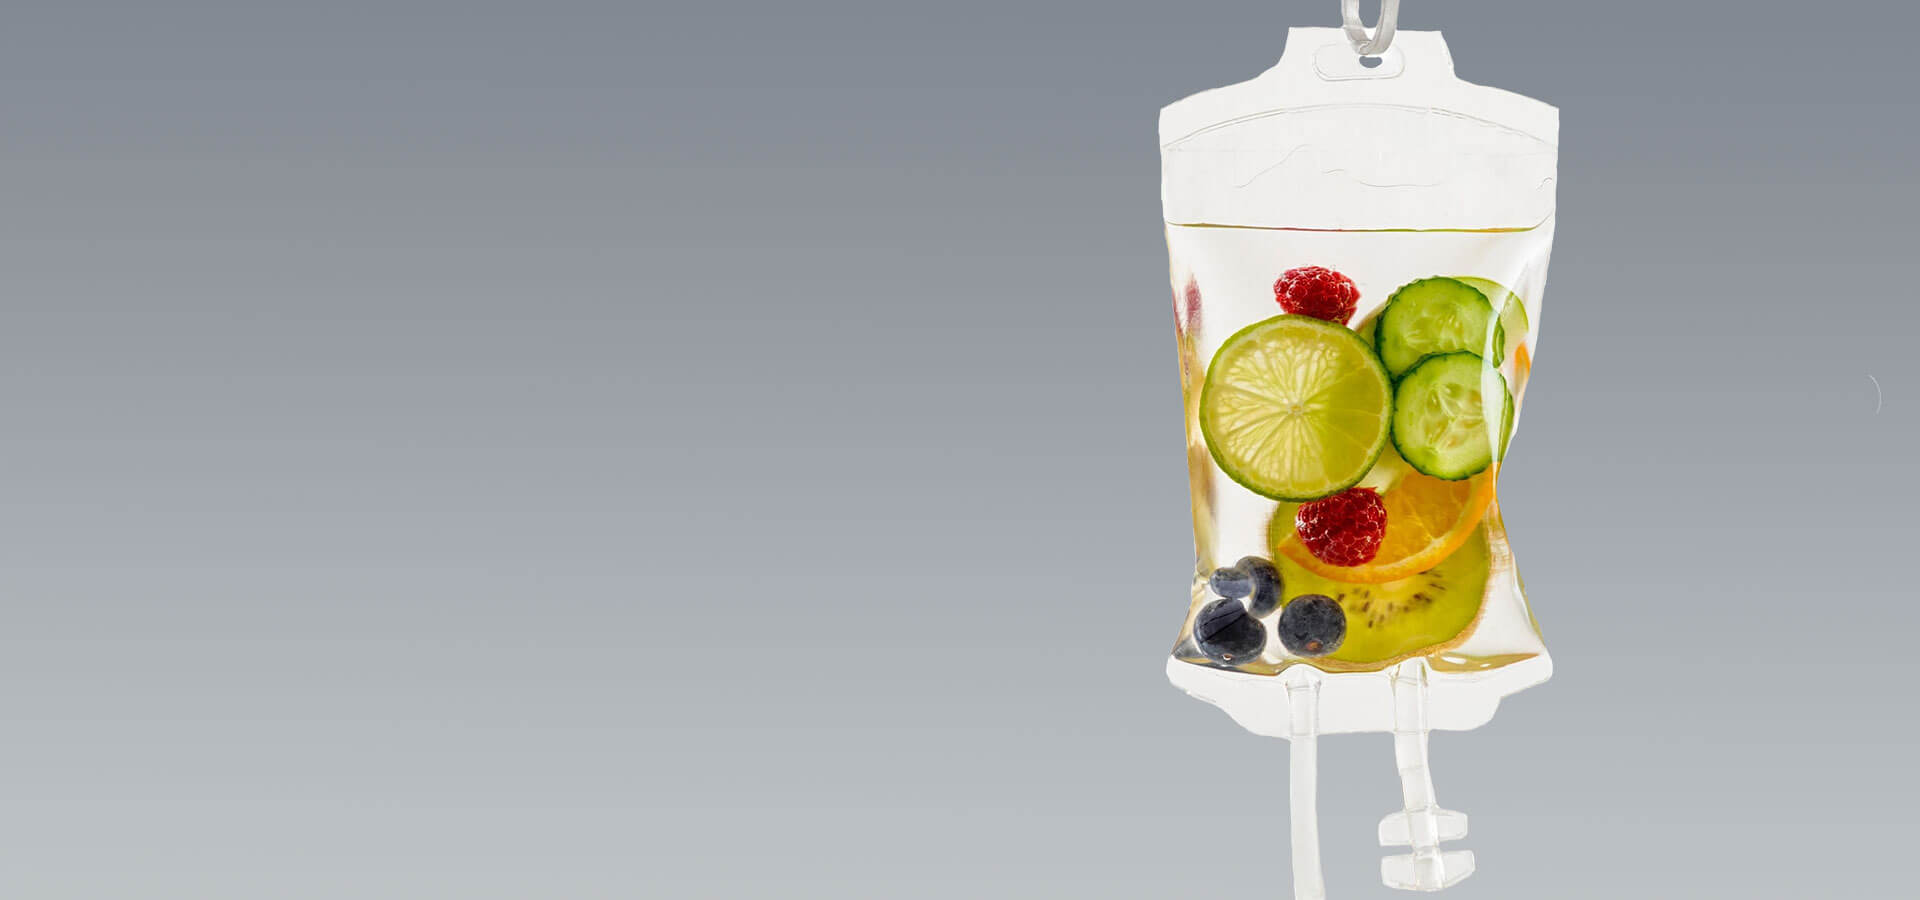 IV Therapy bag with fruit and vegetables inside from IV Therapy Long Island